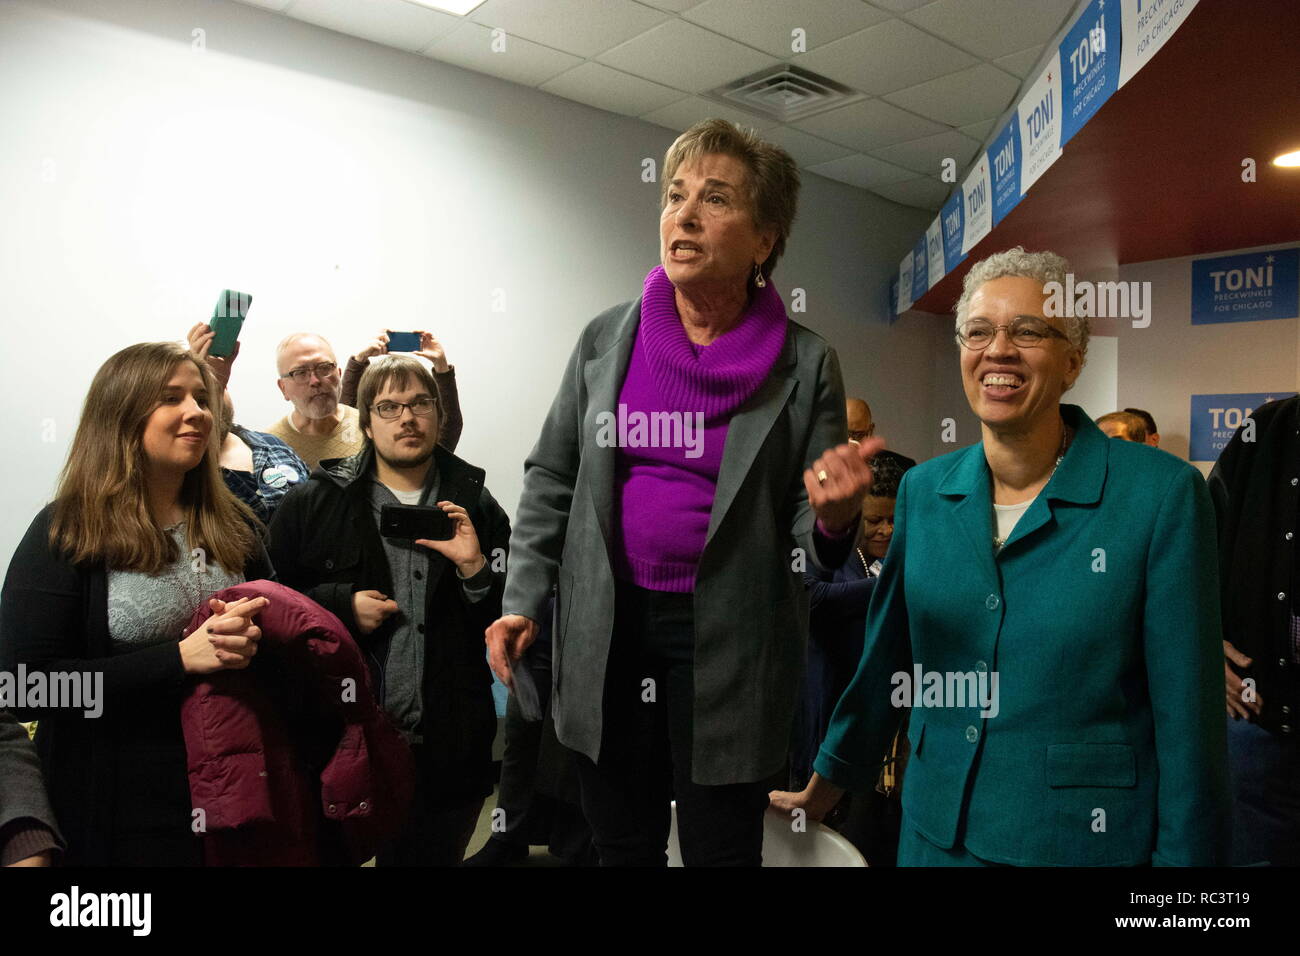 Chicago, Illinios, USA. 12th Jan, 2019. Democratic Congresswoman Jan Schakowski with TONI PRECKWINKLE, mayoral candidate at the grand opening of Preckwinkle's Northside office. Credit: Karen I. Hirsch/ZUMA Wire/Alamy Live News Stock Photo